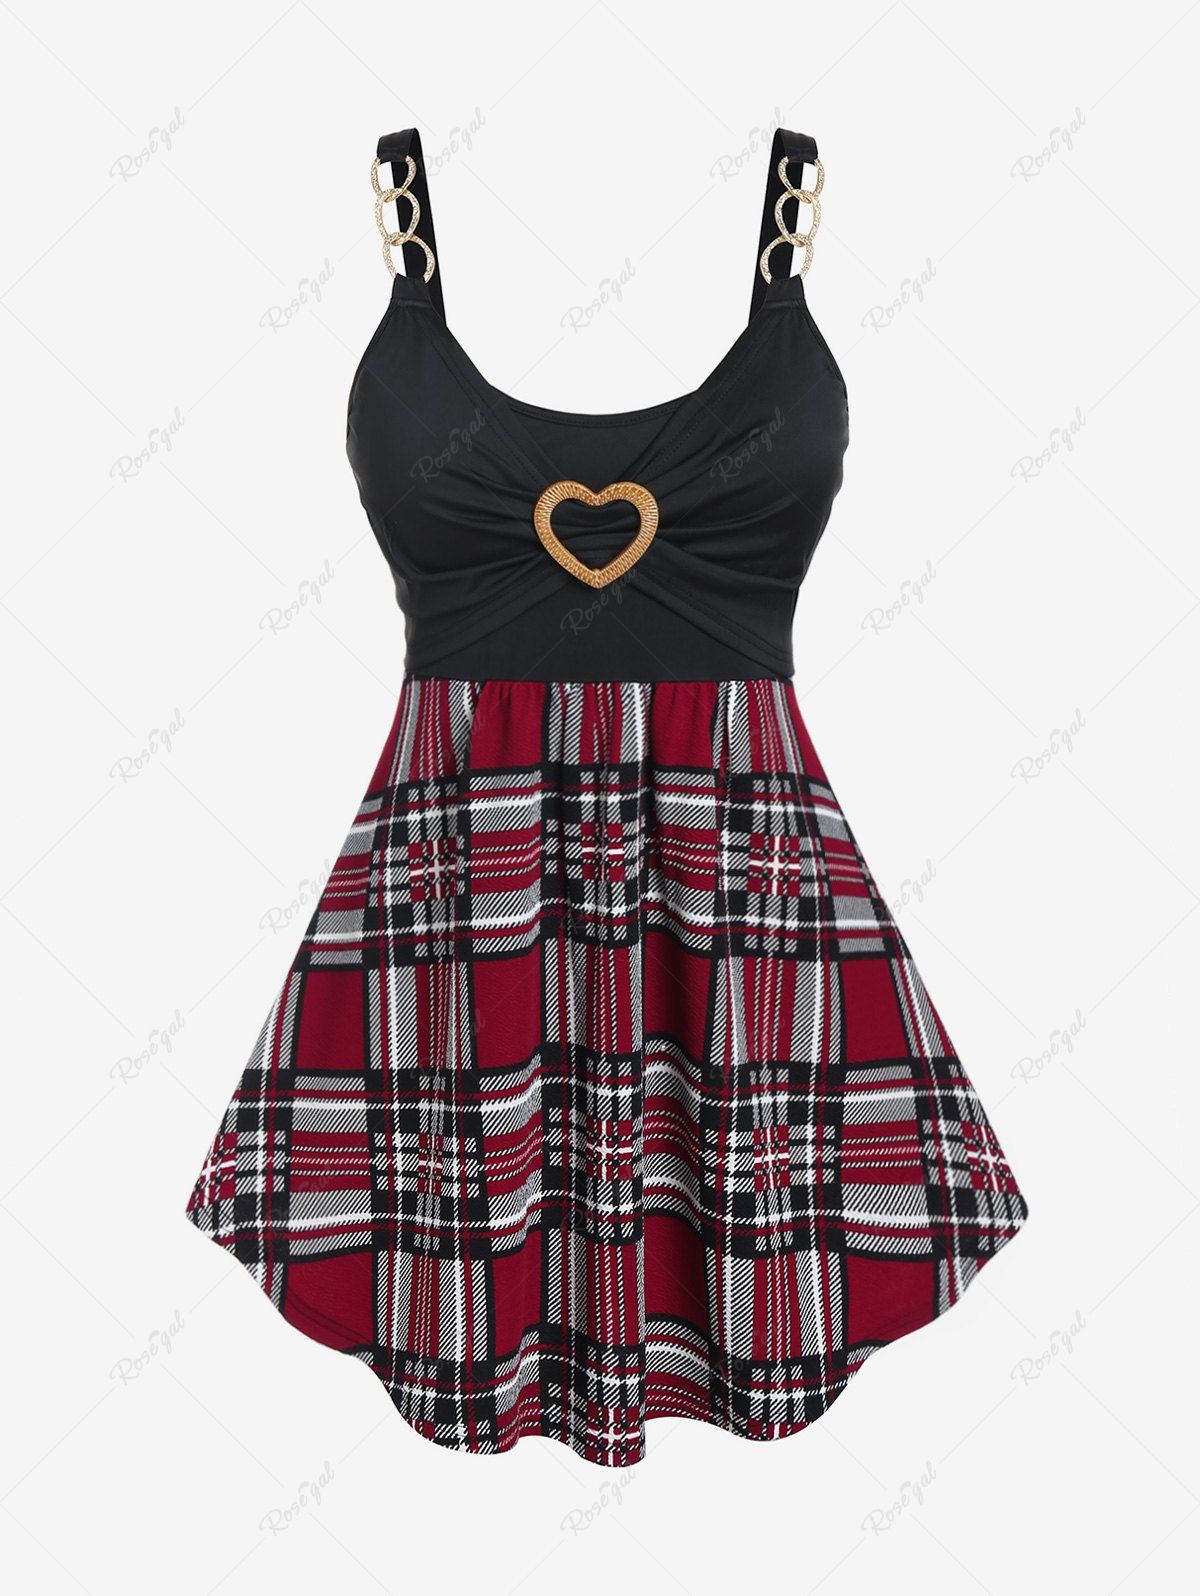 Hot Plus Size Colorblock Heart Ring Embellished Plaid Tunic Top  